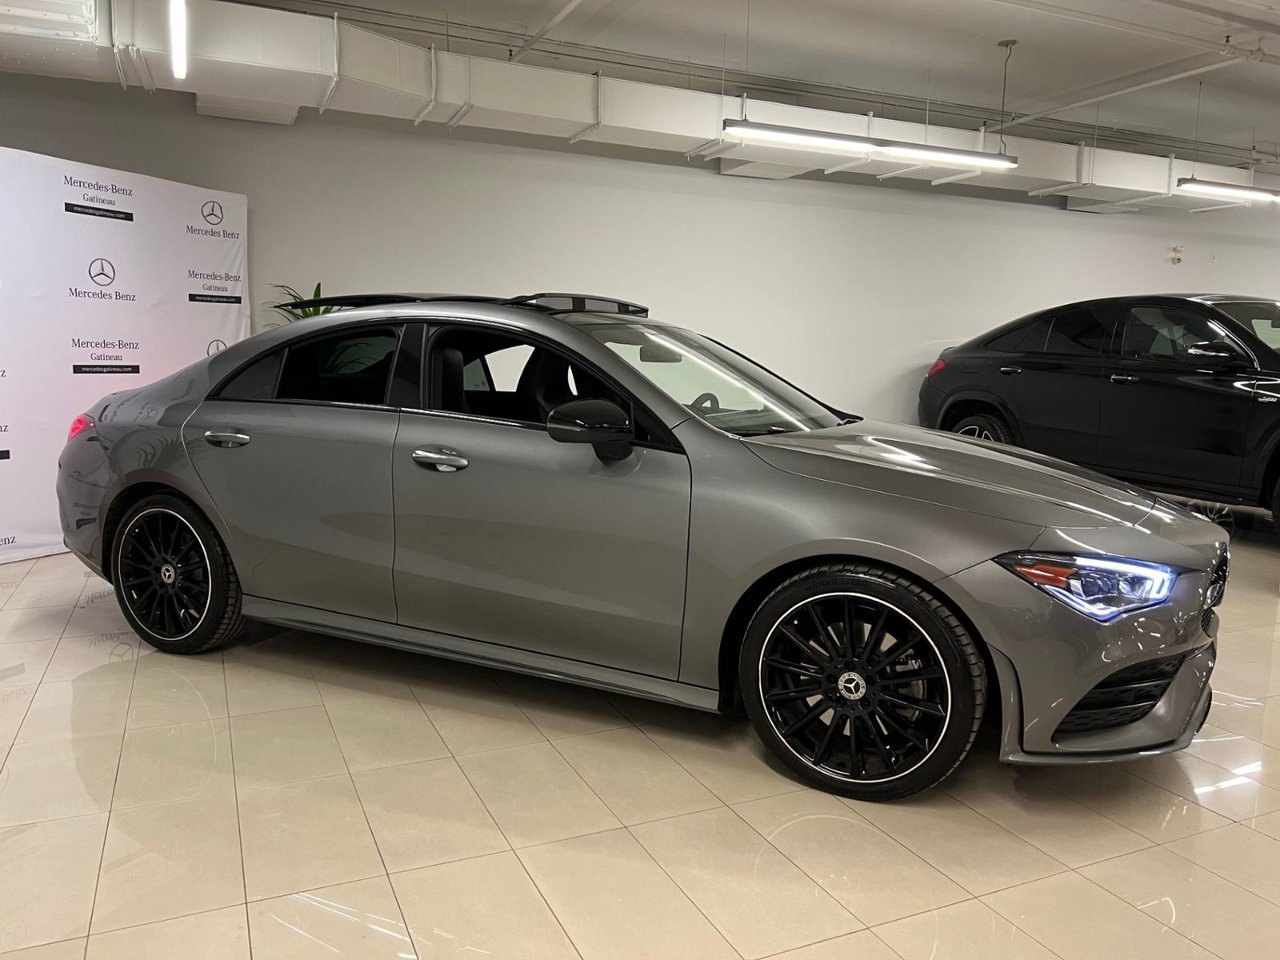 2022 Mercedes-Benz CLA250 4MATIC Coupe